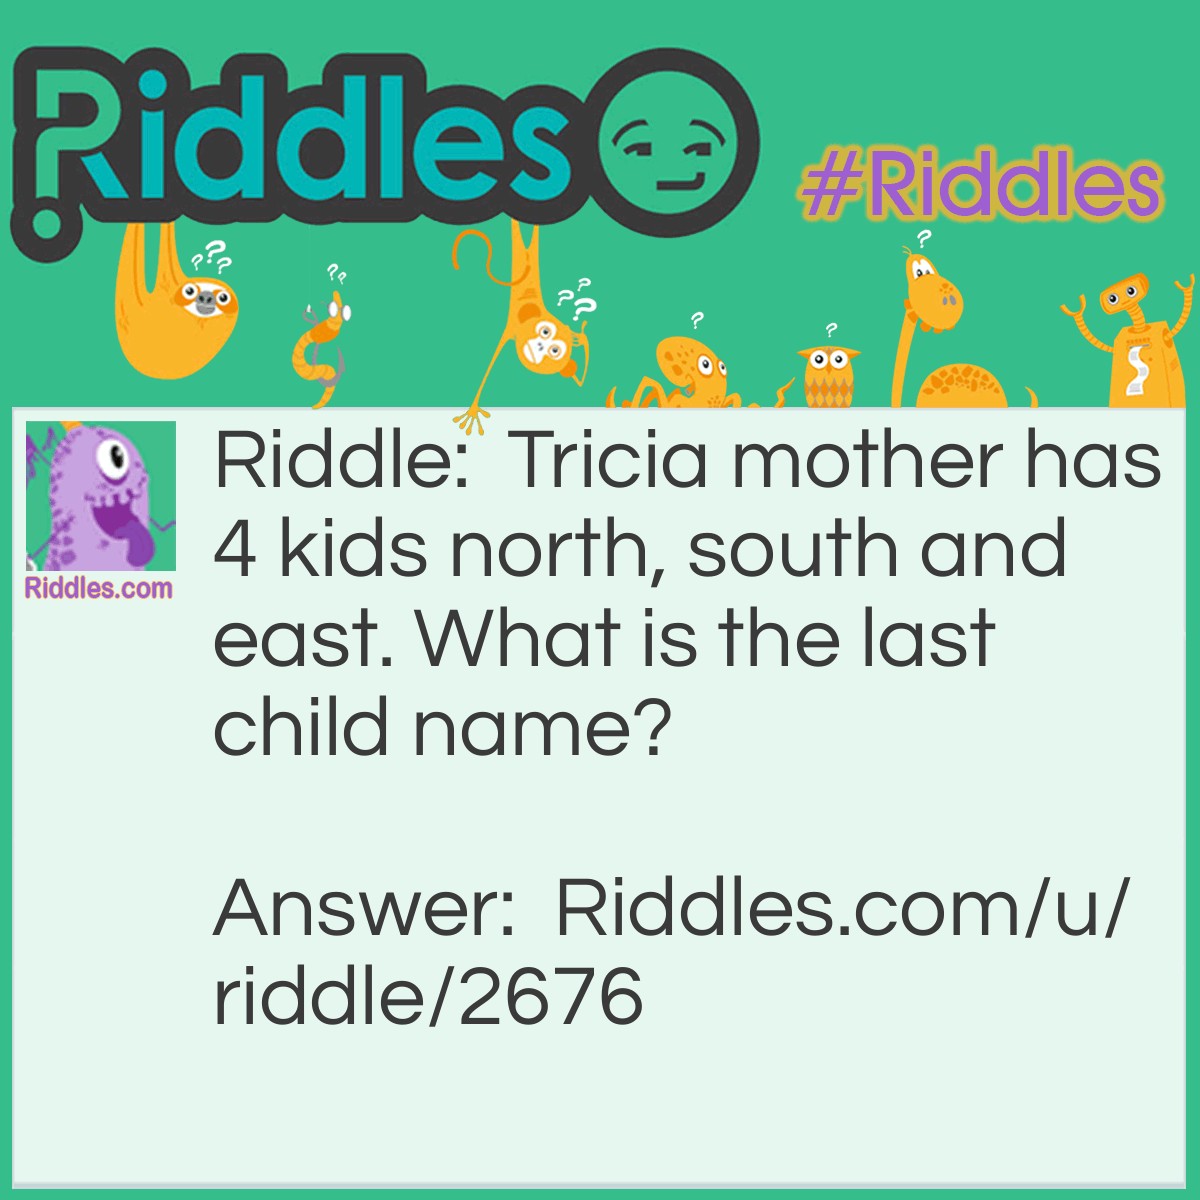 Riddle: Tricia's mother has 4 kids north, south and east. What is the last child's name? Answer: Tricia.